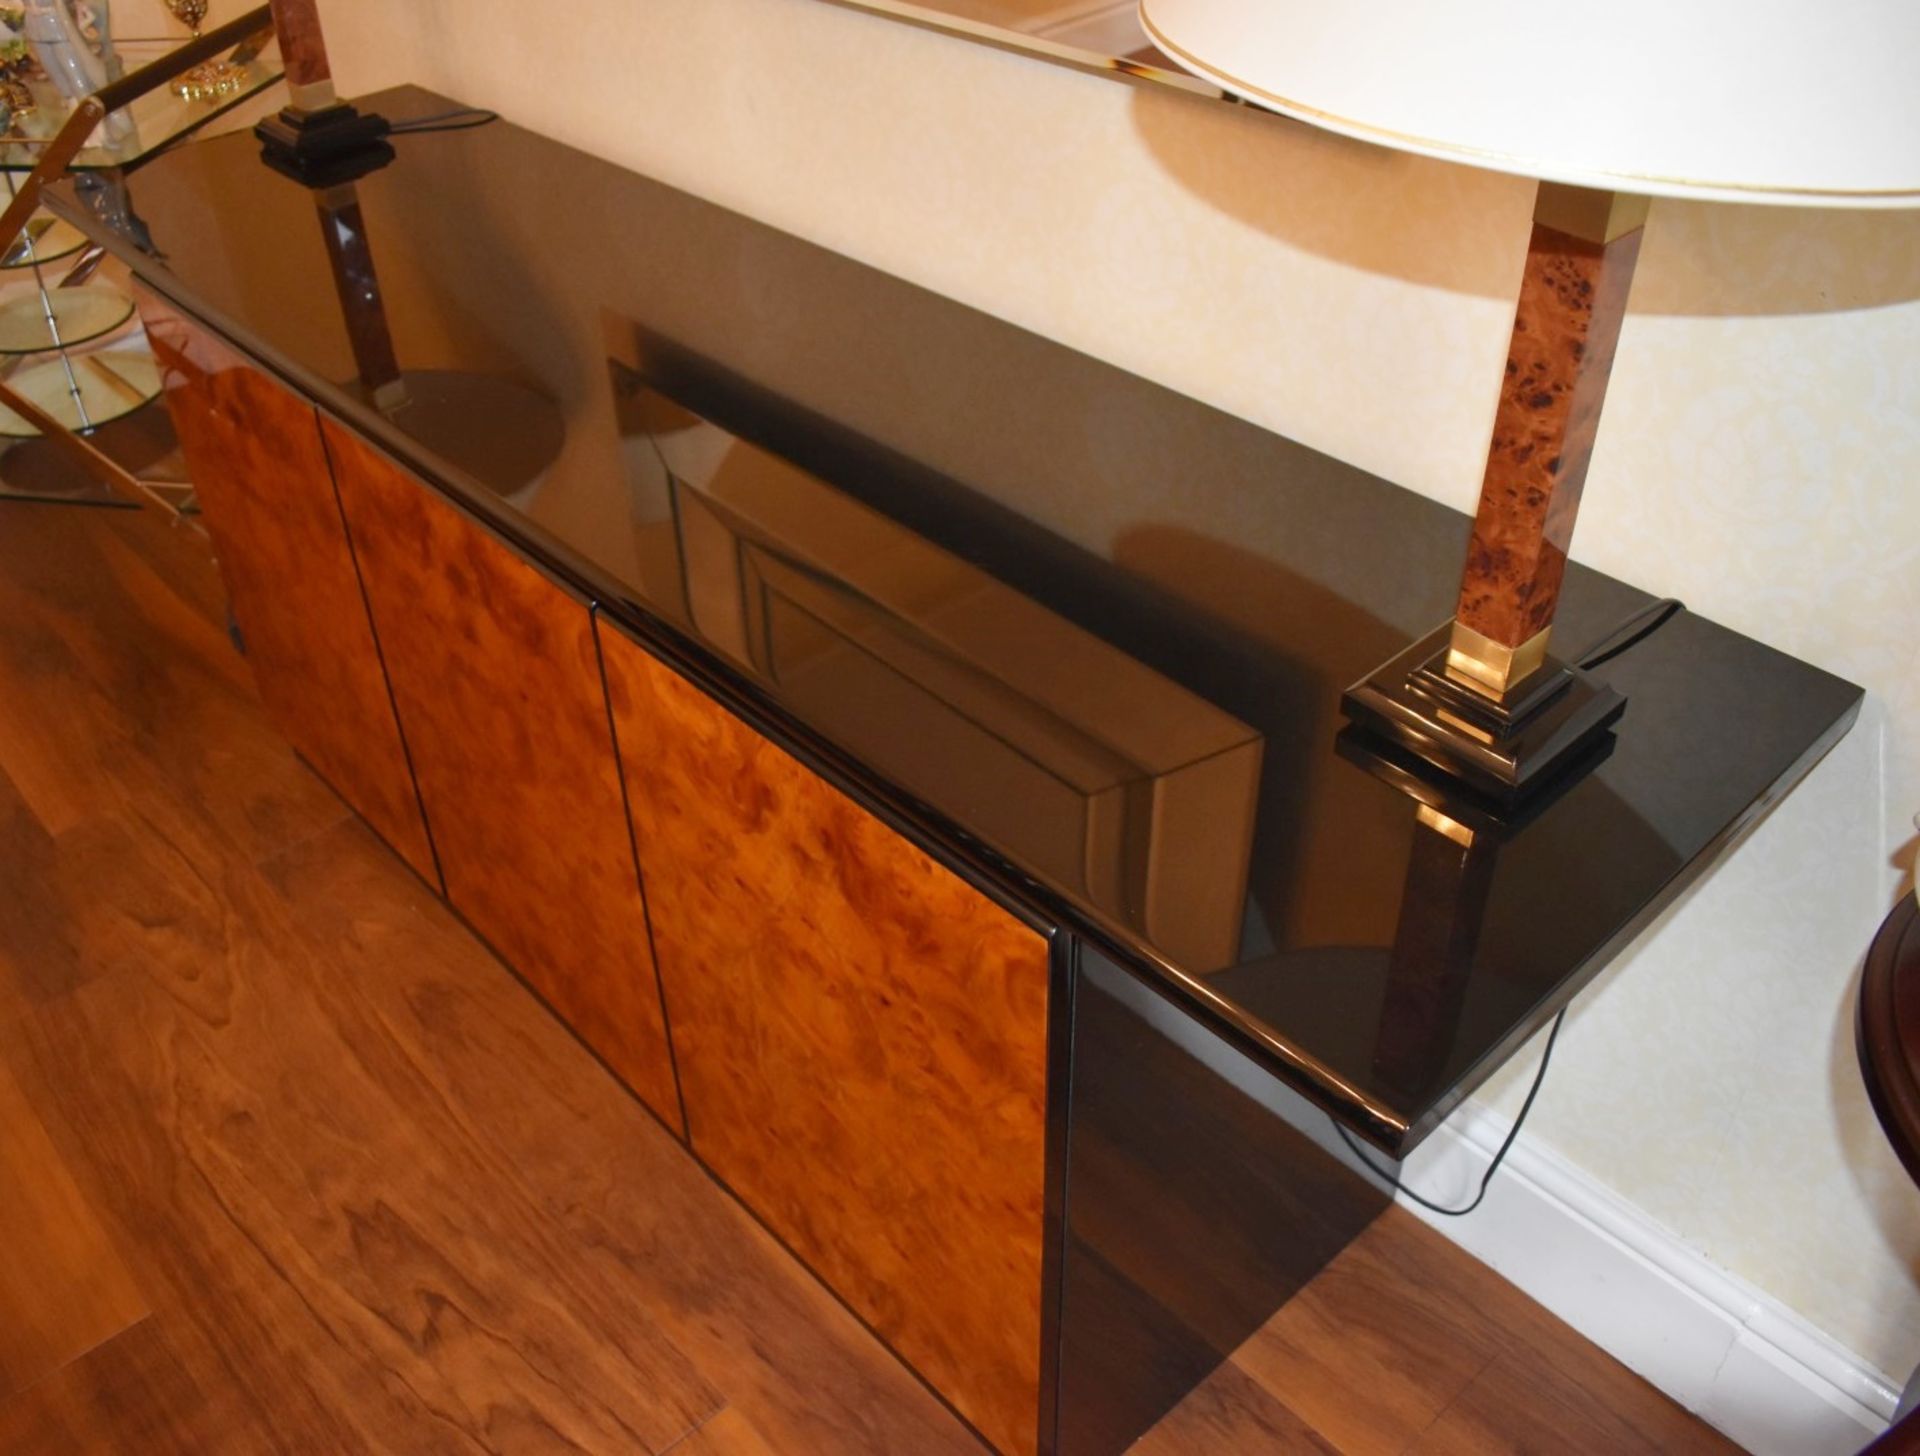 1 x Contemporary Three Door Sideboard With Dark Gloss Finish and Burr Walnut Doors - Dimensions - Image 3 of 10